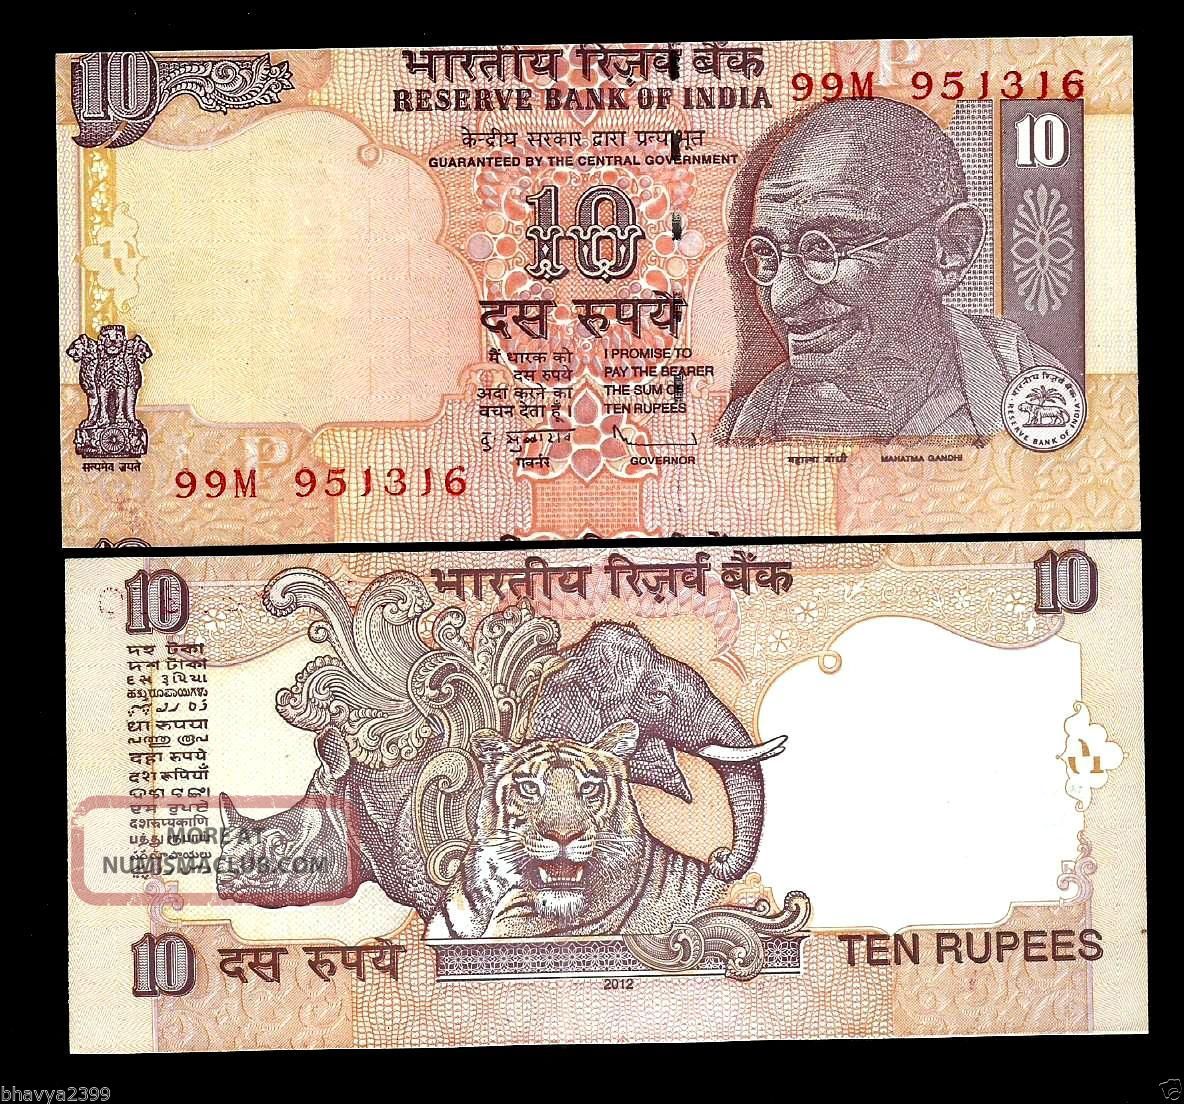 Rs 10/ - India Bank Note Error/ Misprint Shift Crease On Top Gem Unc Asia photo